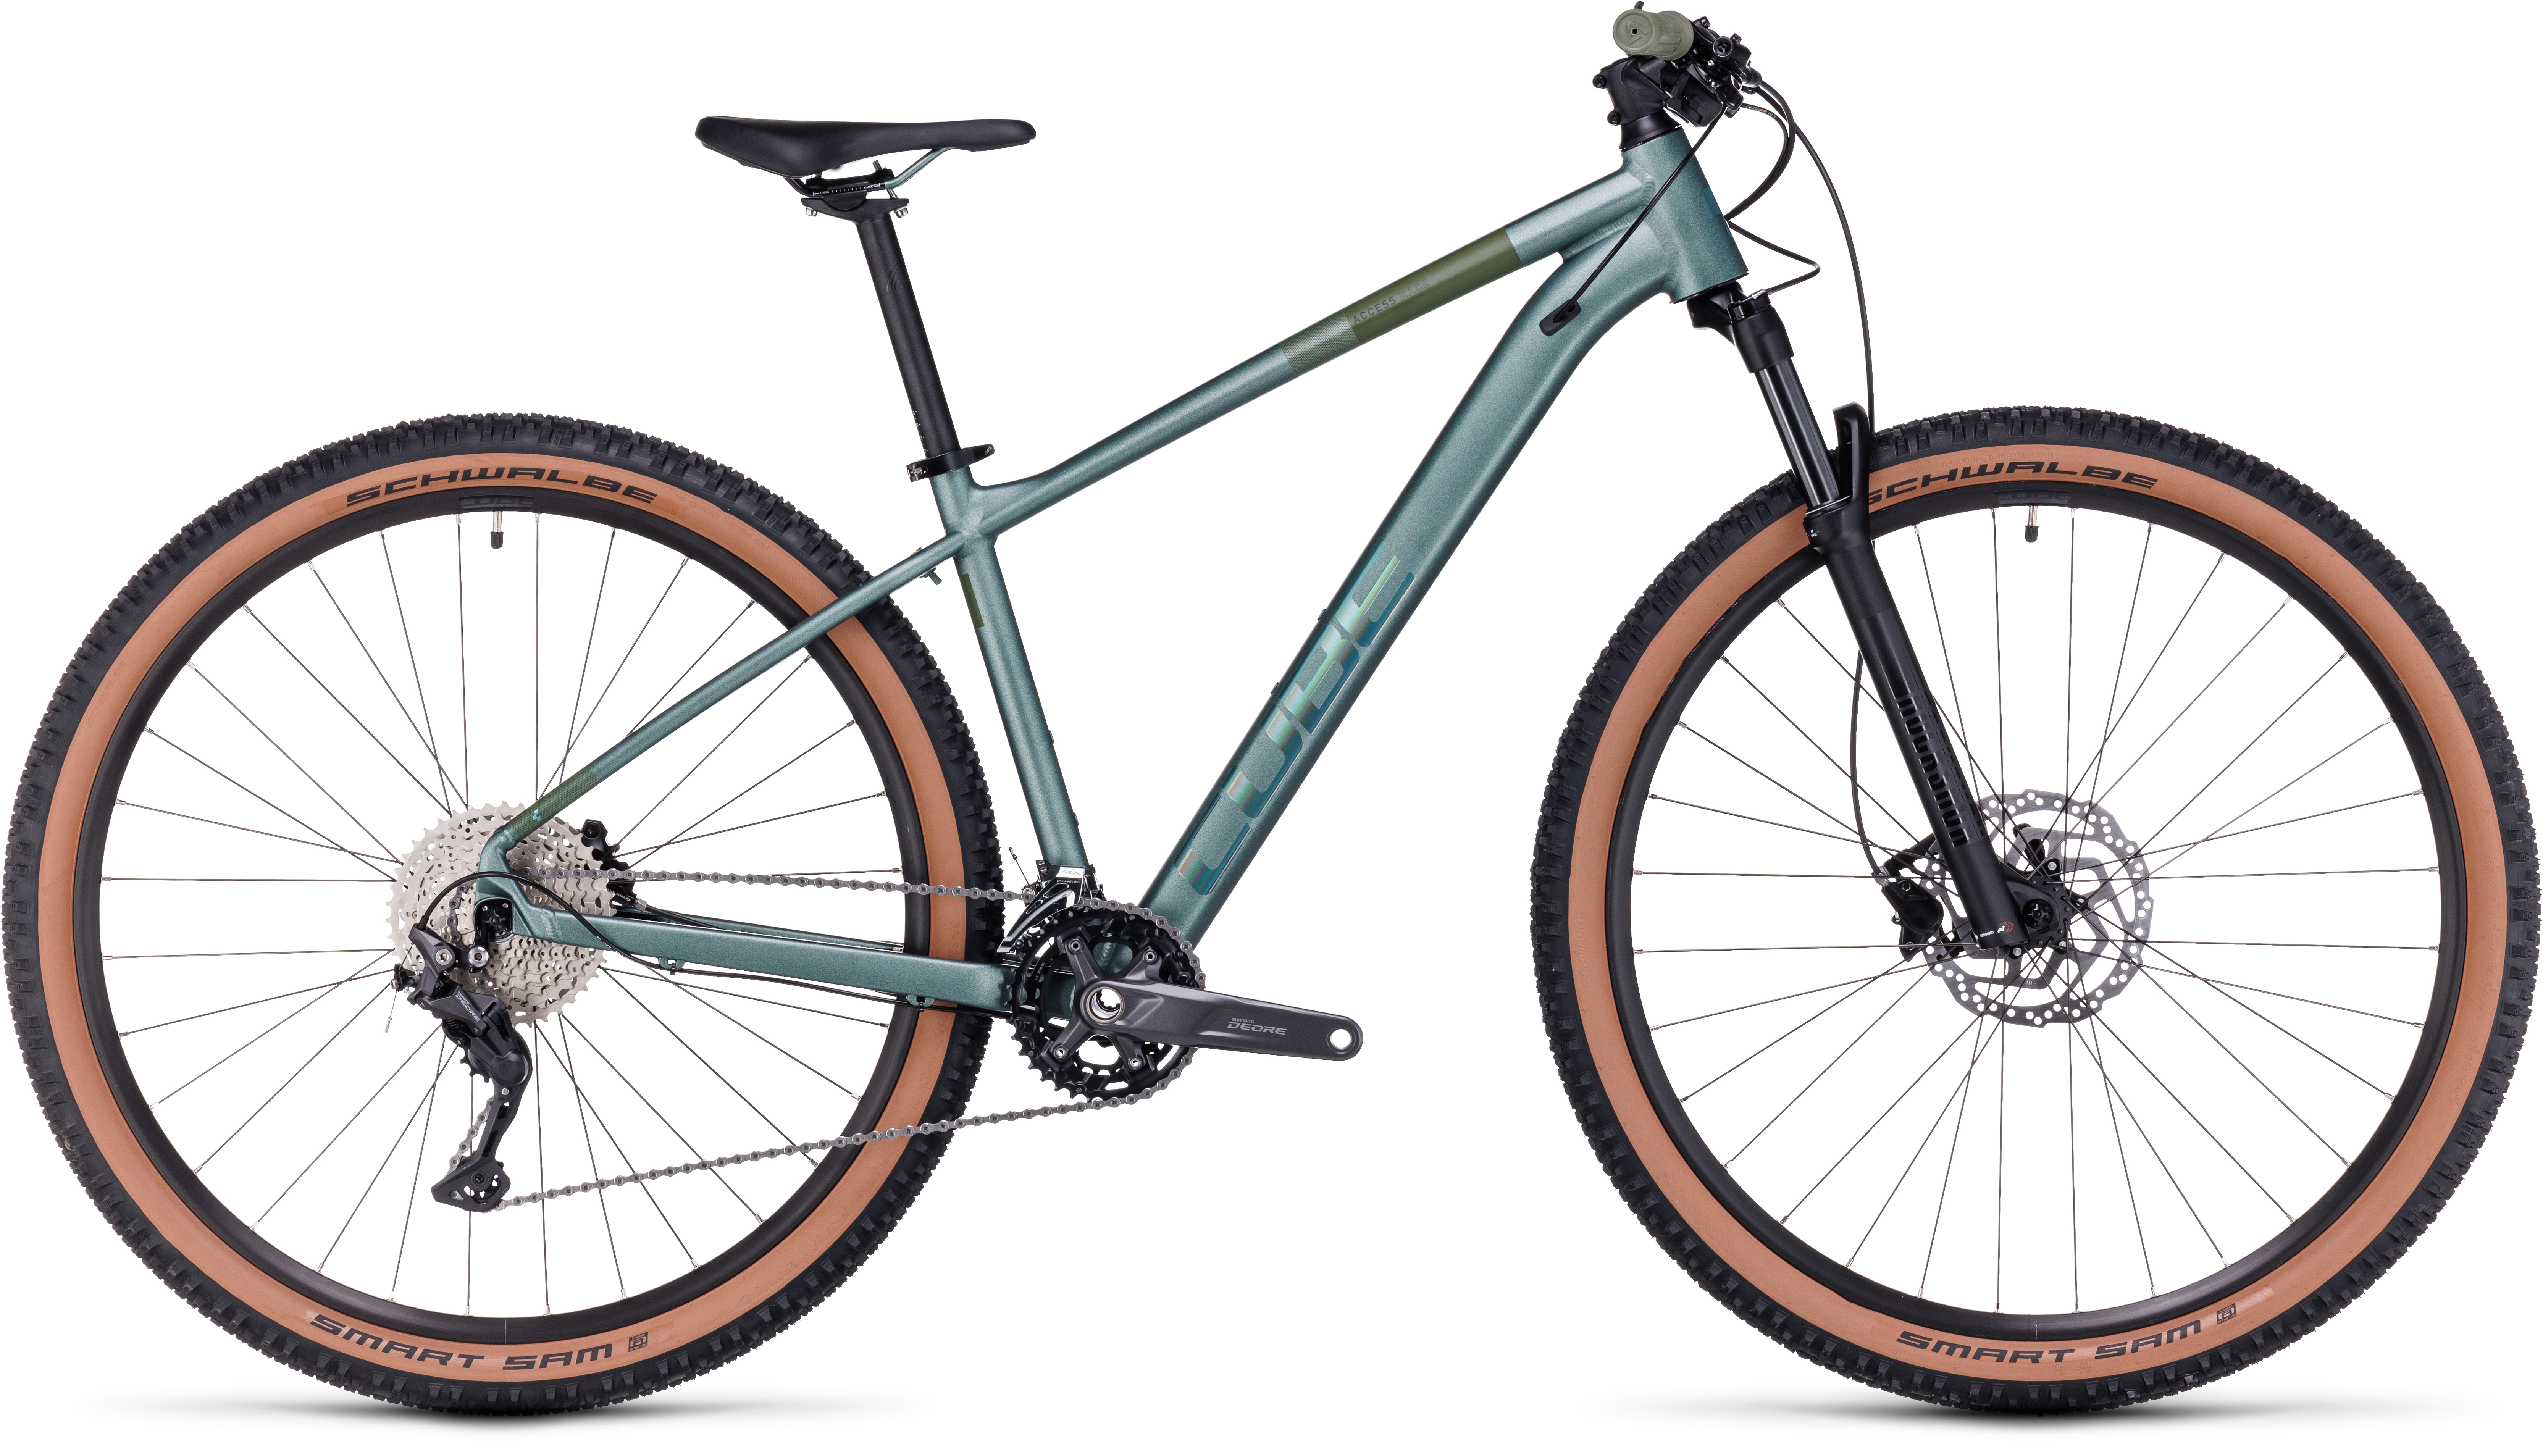 Cube Access WS Race sparkgreen´n´olive